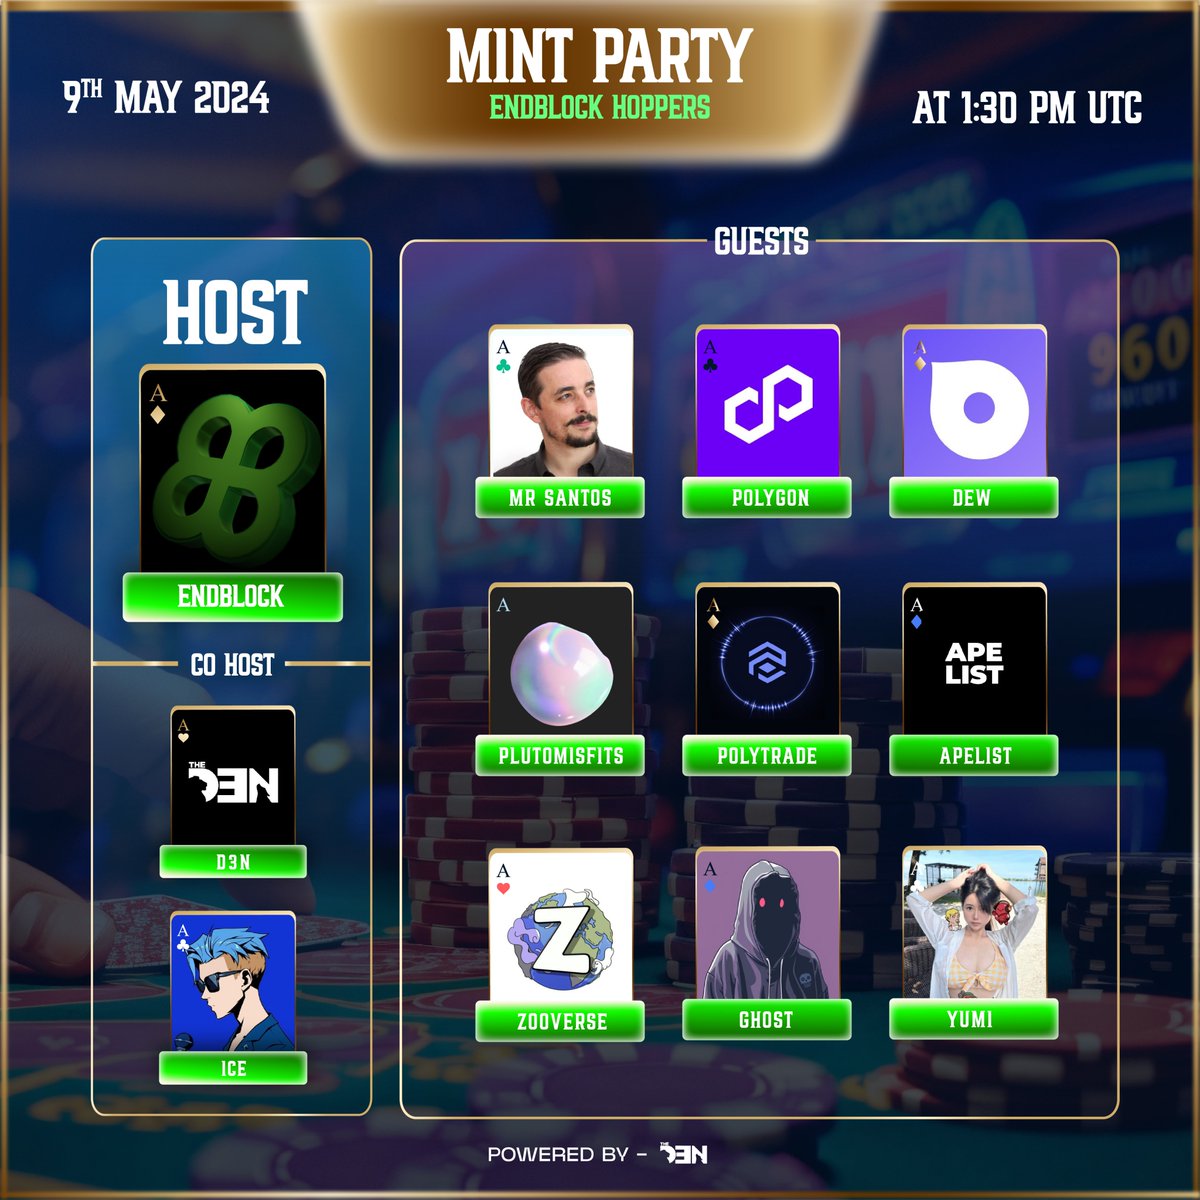 ♦️MINT DAY IS HERE ♦️ Join Endblock's mint party today at 1:30 PM UTC to witness the launch of our new collection The Hoppers with our Founder @mrsantoscoach and Co-Hosts @ice_nfts @thed3n_ And our esteemed guests @0xPolygon @Dew_HQ @plutomisfits @Polytrade_fin @TheApeList_…